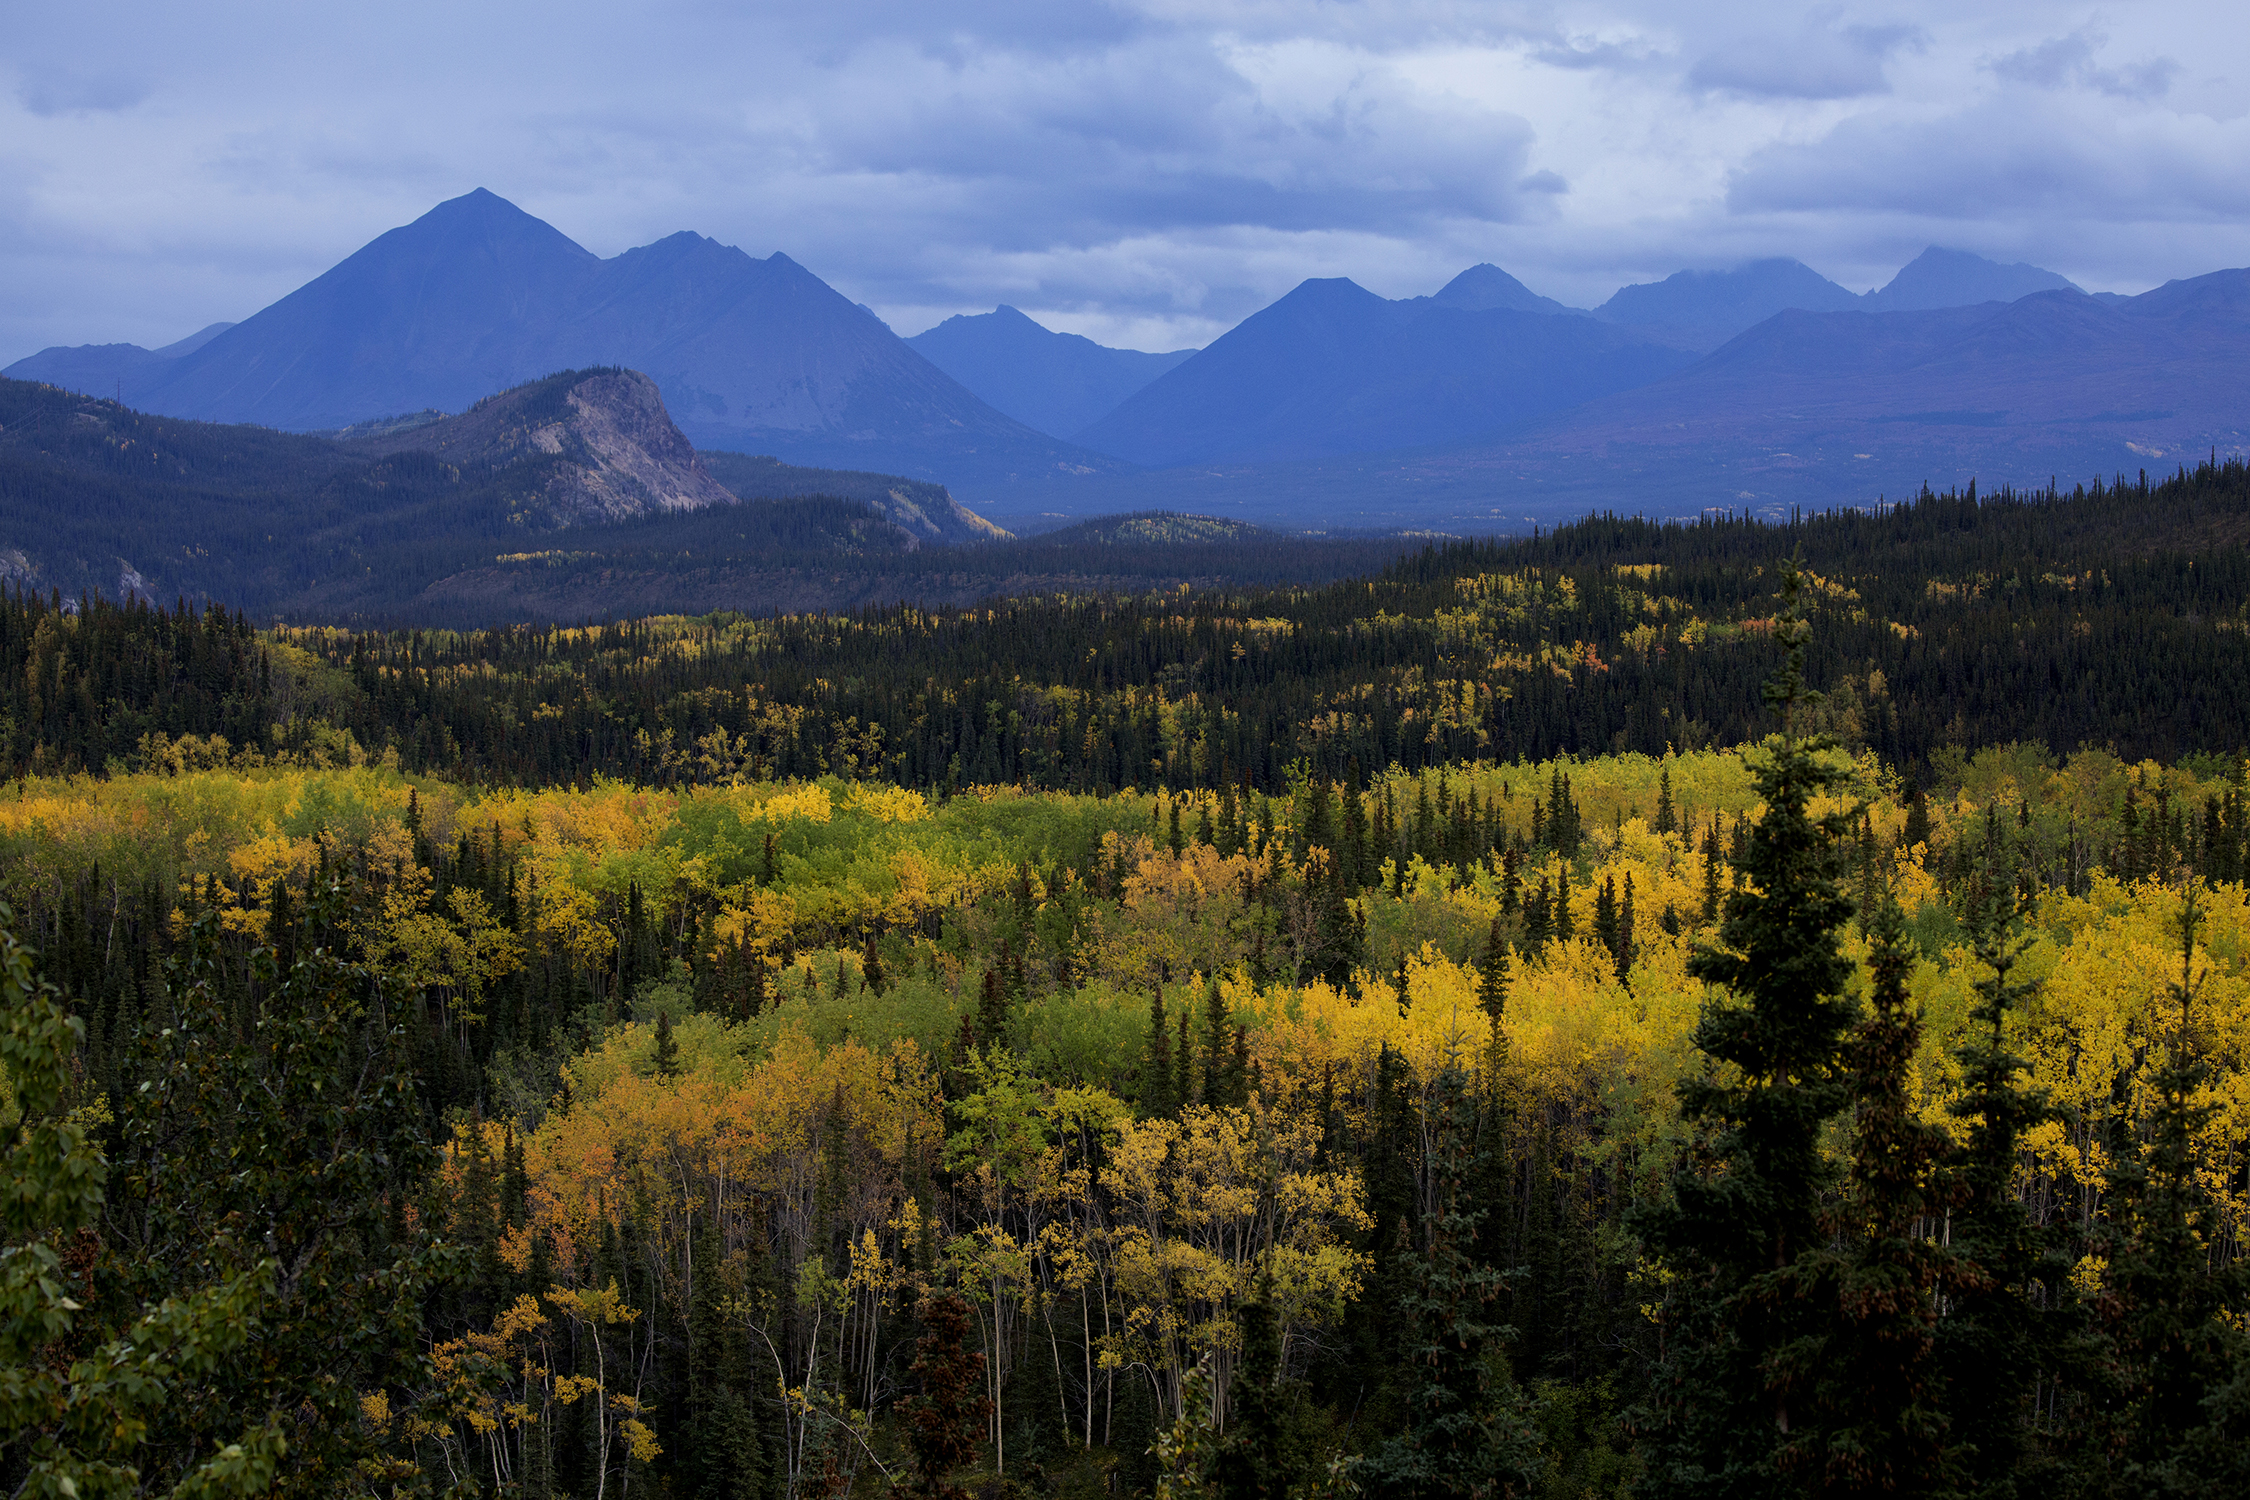  Autumn turns the leaves to a golden yellow in Alaska’s Denali National Park and Preserve located just 250 miles south of the Arctic Circle. In this subarctic wilderness the short autumns burst with vibrant colors of birch and aspen. © Photo by Gail 